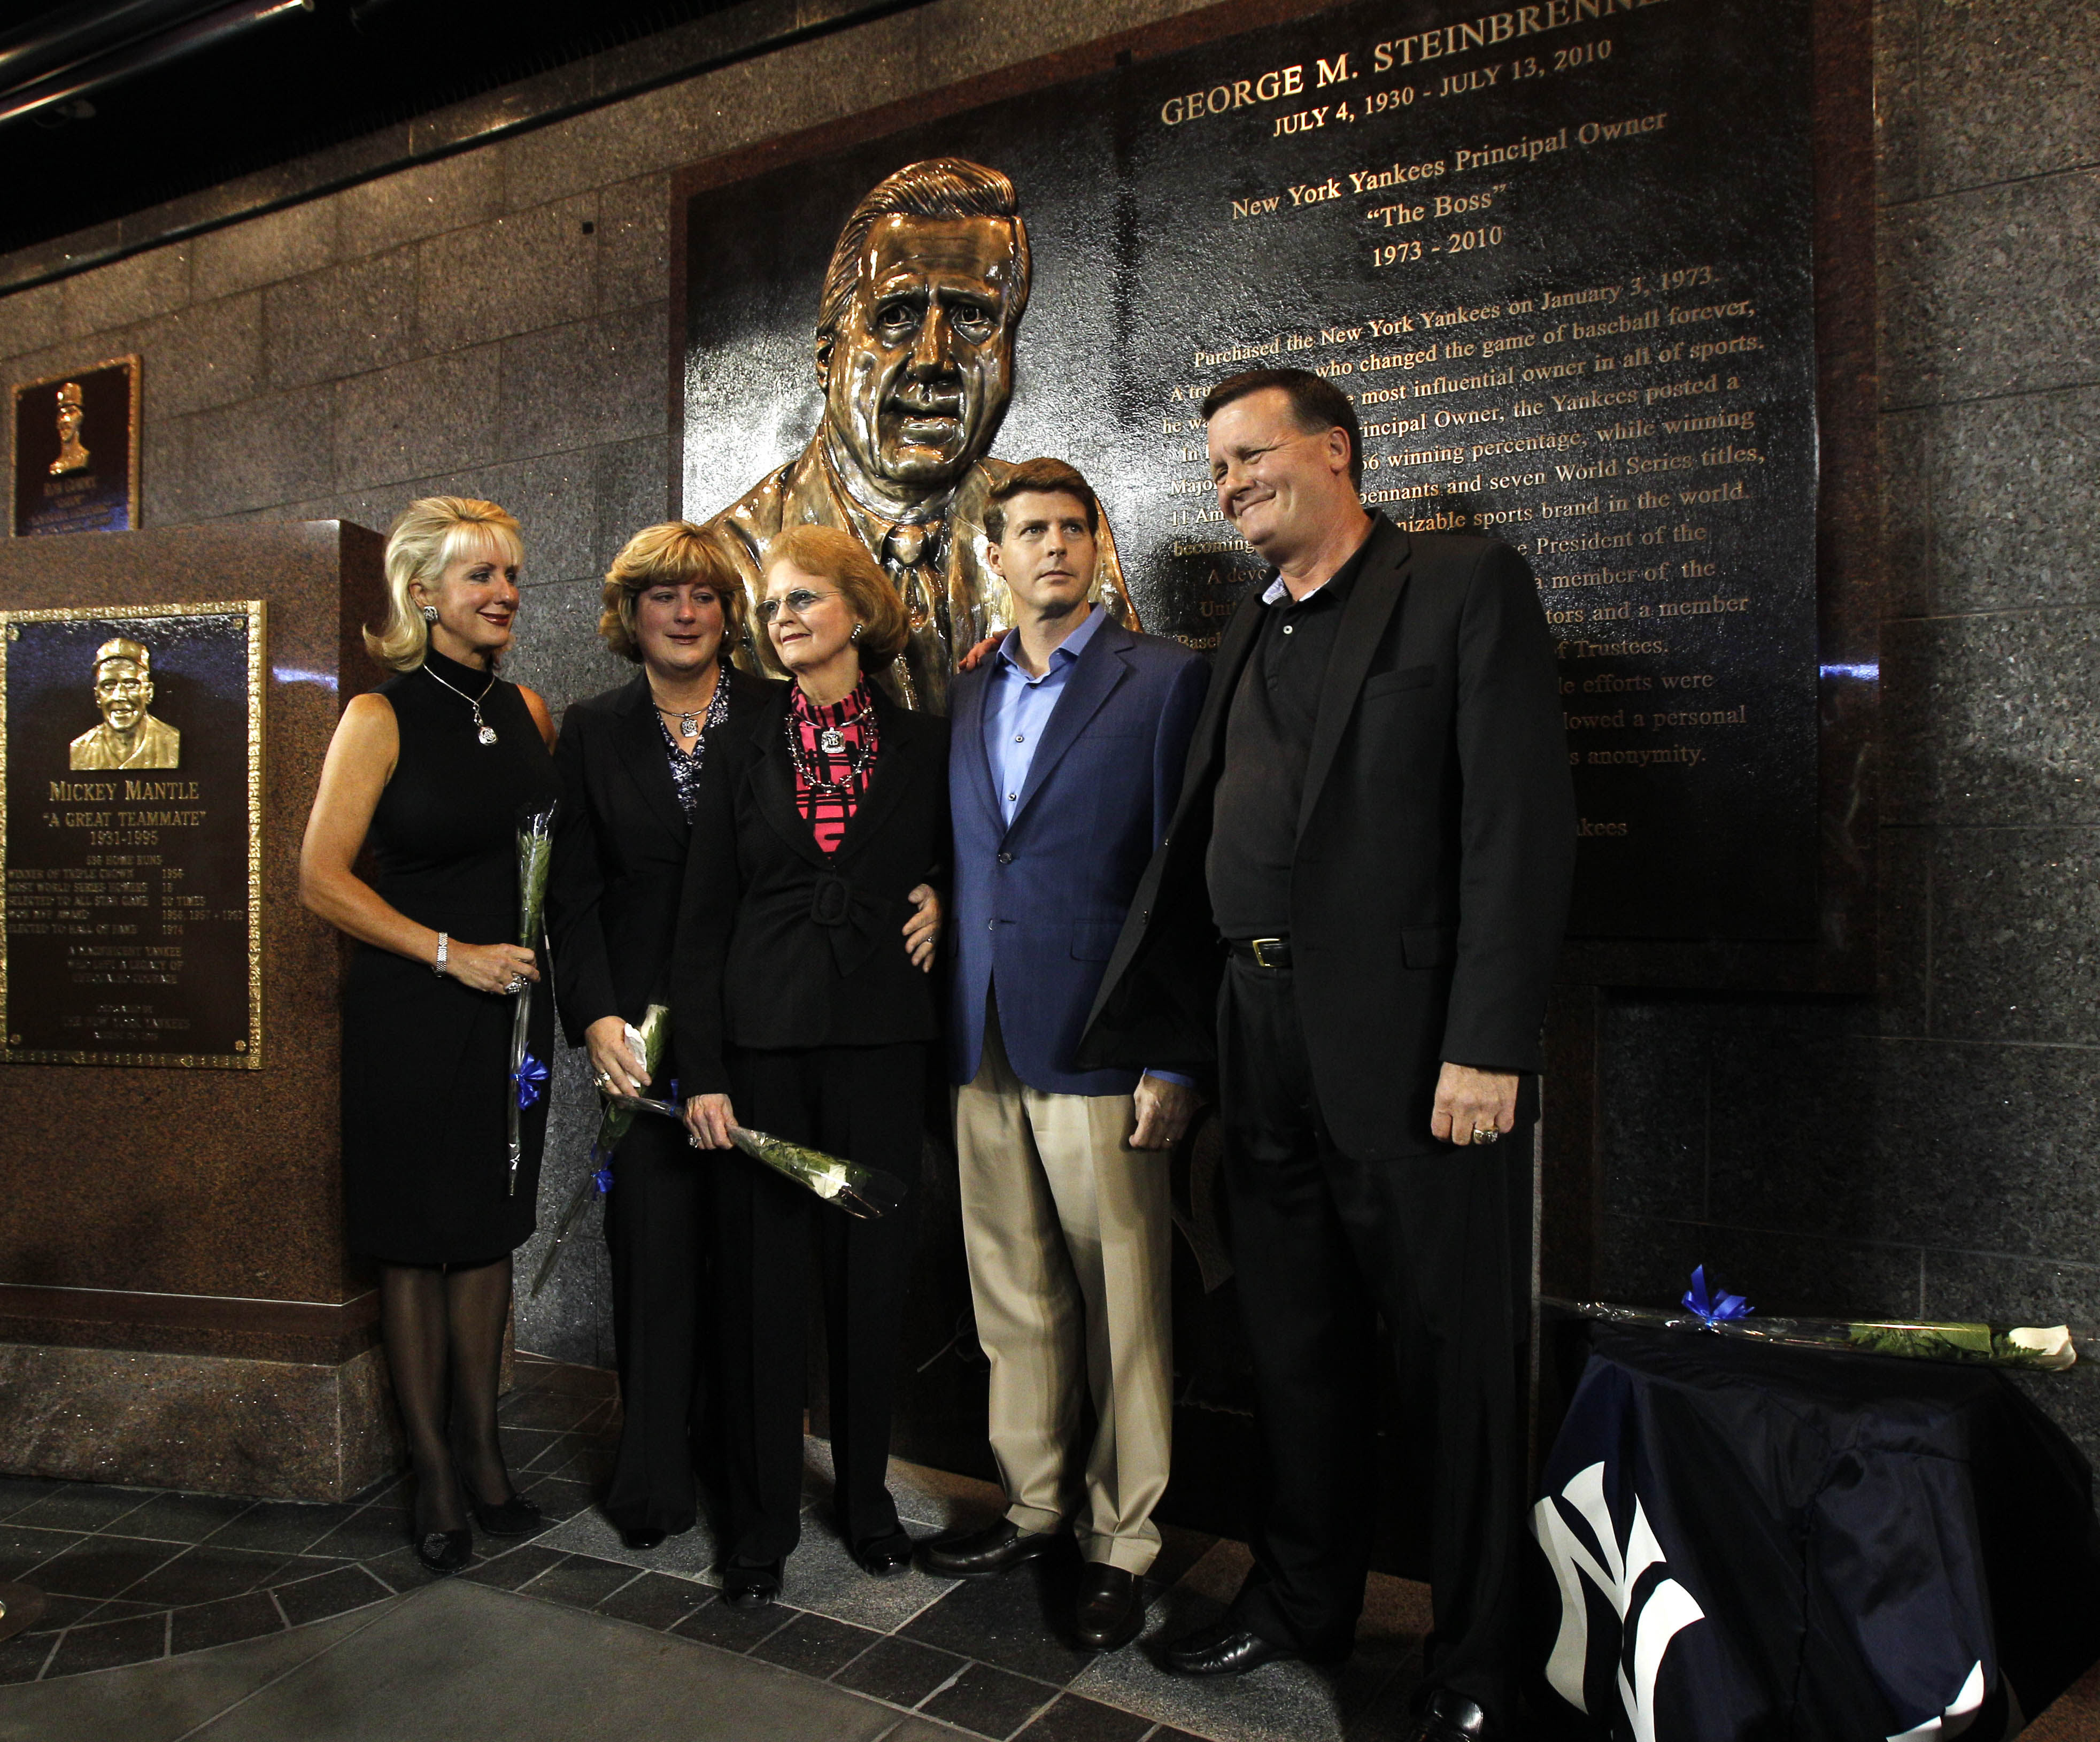 NEW YORK - SEPTEMBER 20:  Members of the Steinbrenner family pose for photographers following a ceremony dedicating a monument to the late Yankees principal owner George Steinbrenner before the Yankees baseball game against the Tampa Bay Rays on September